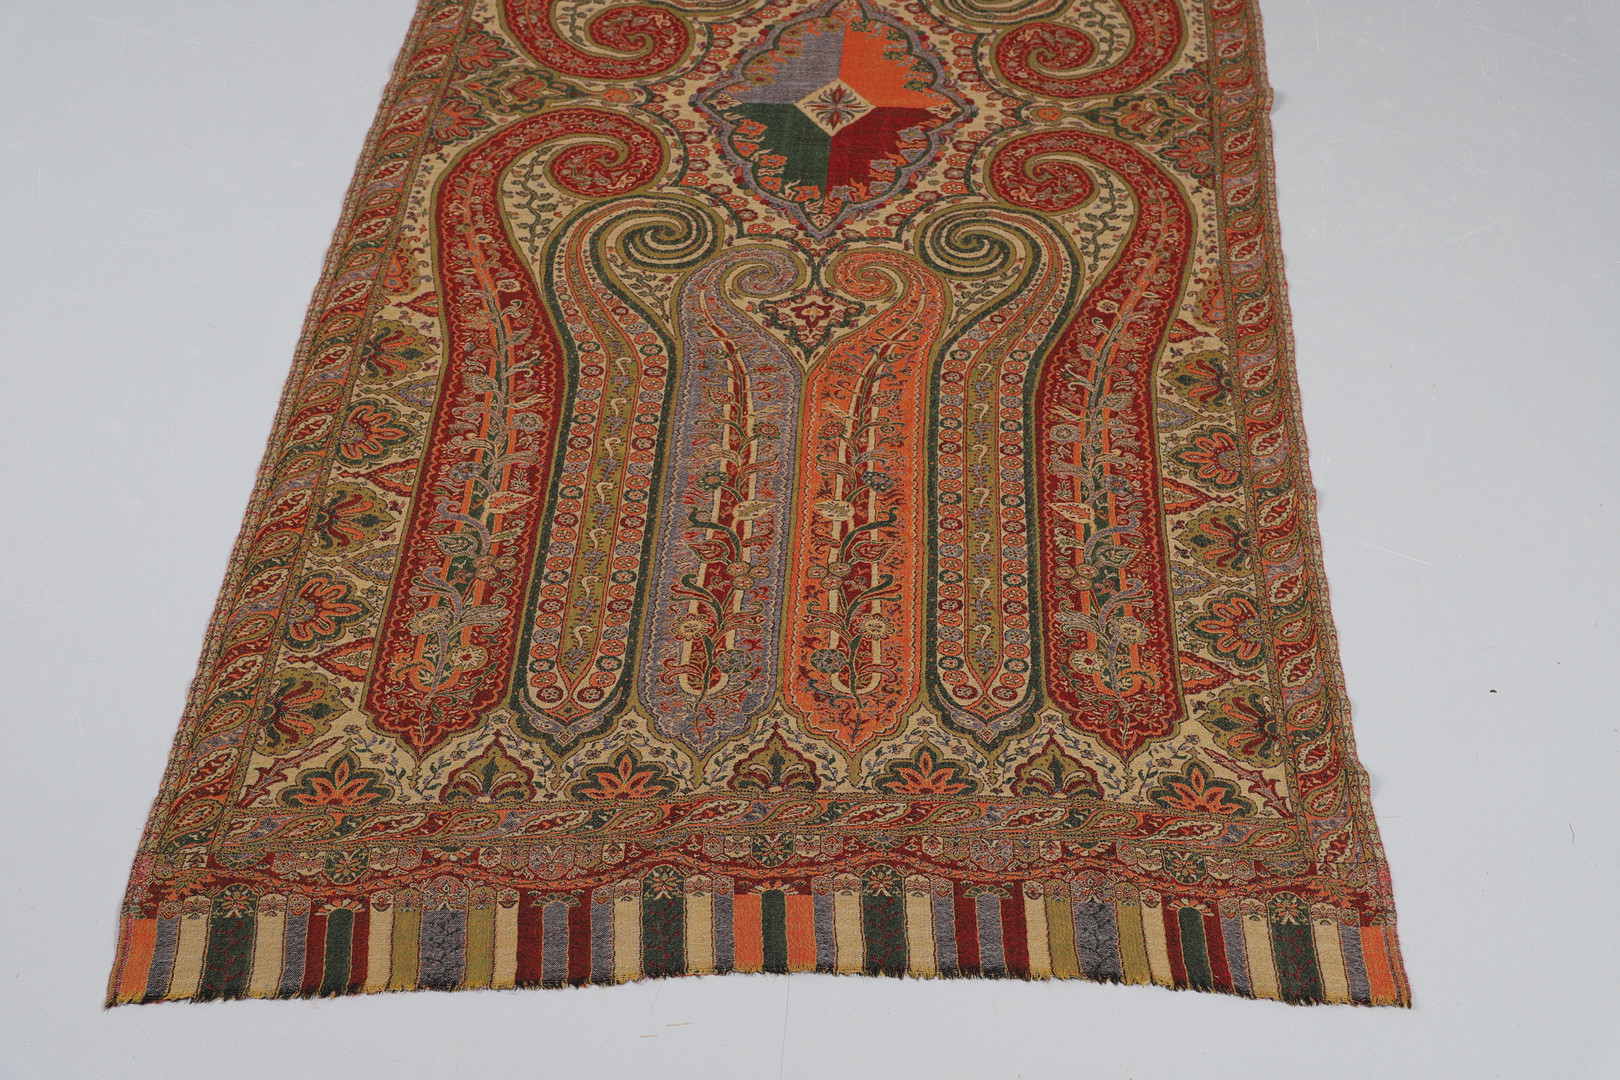 LATE 19THC PAISLEY SHAWL & VARIOUS TEXTILES. - Image 19 of 26